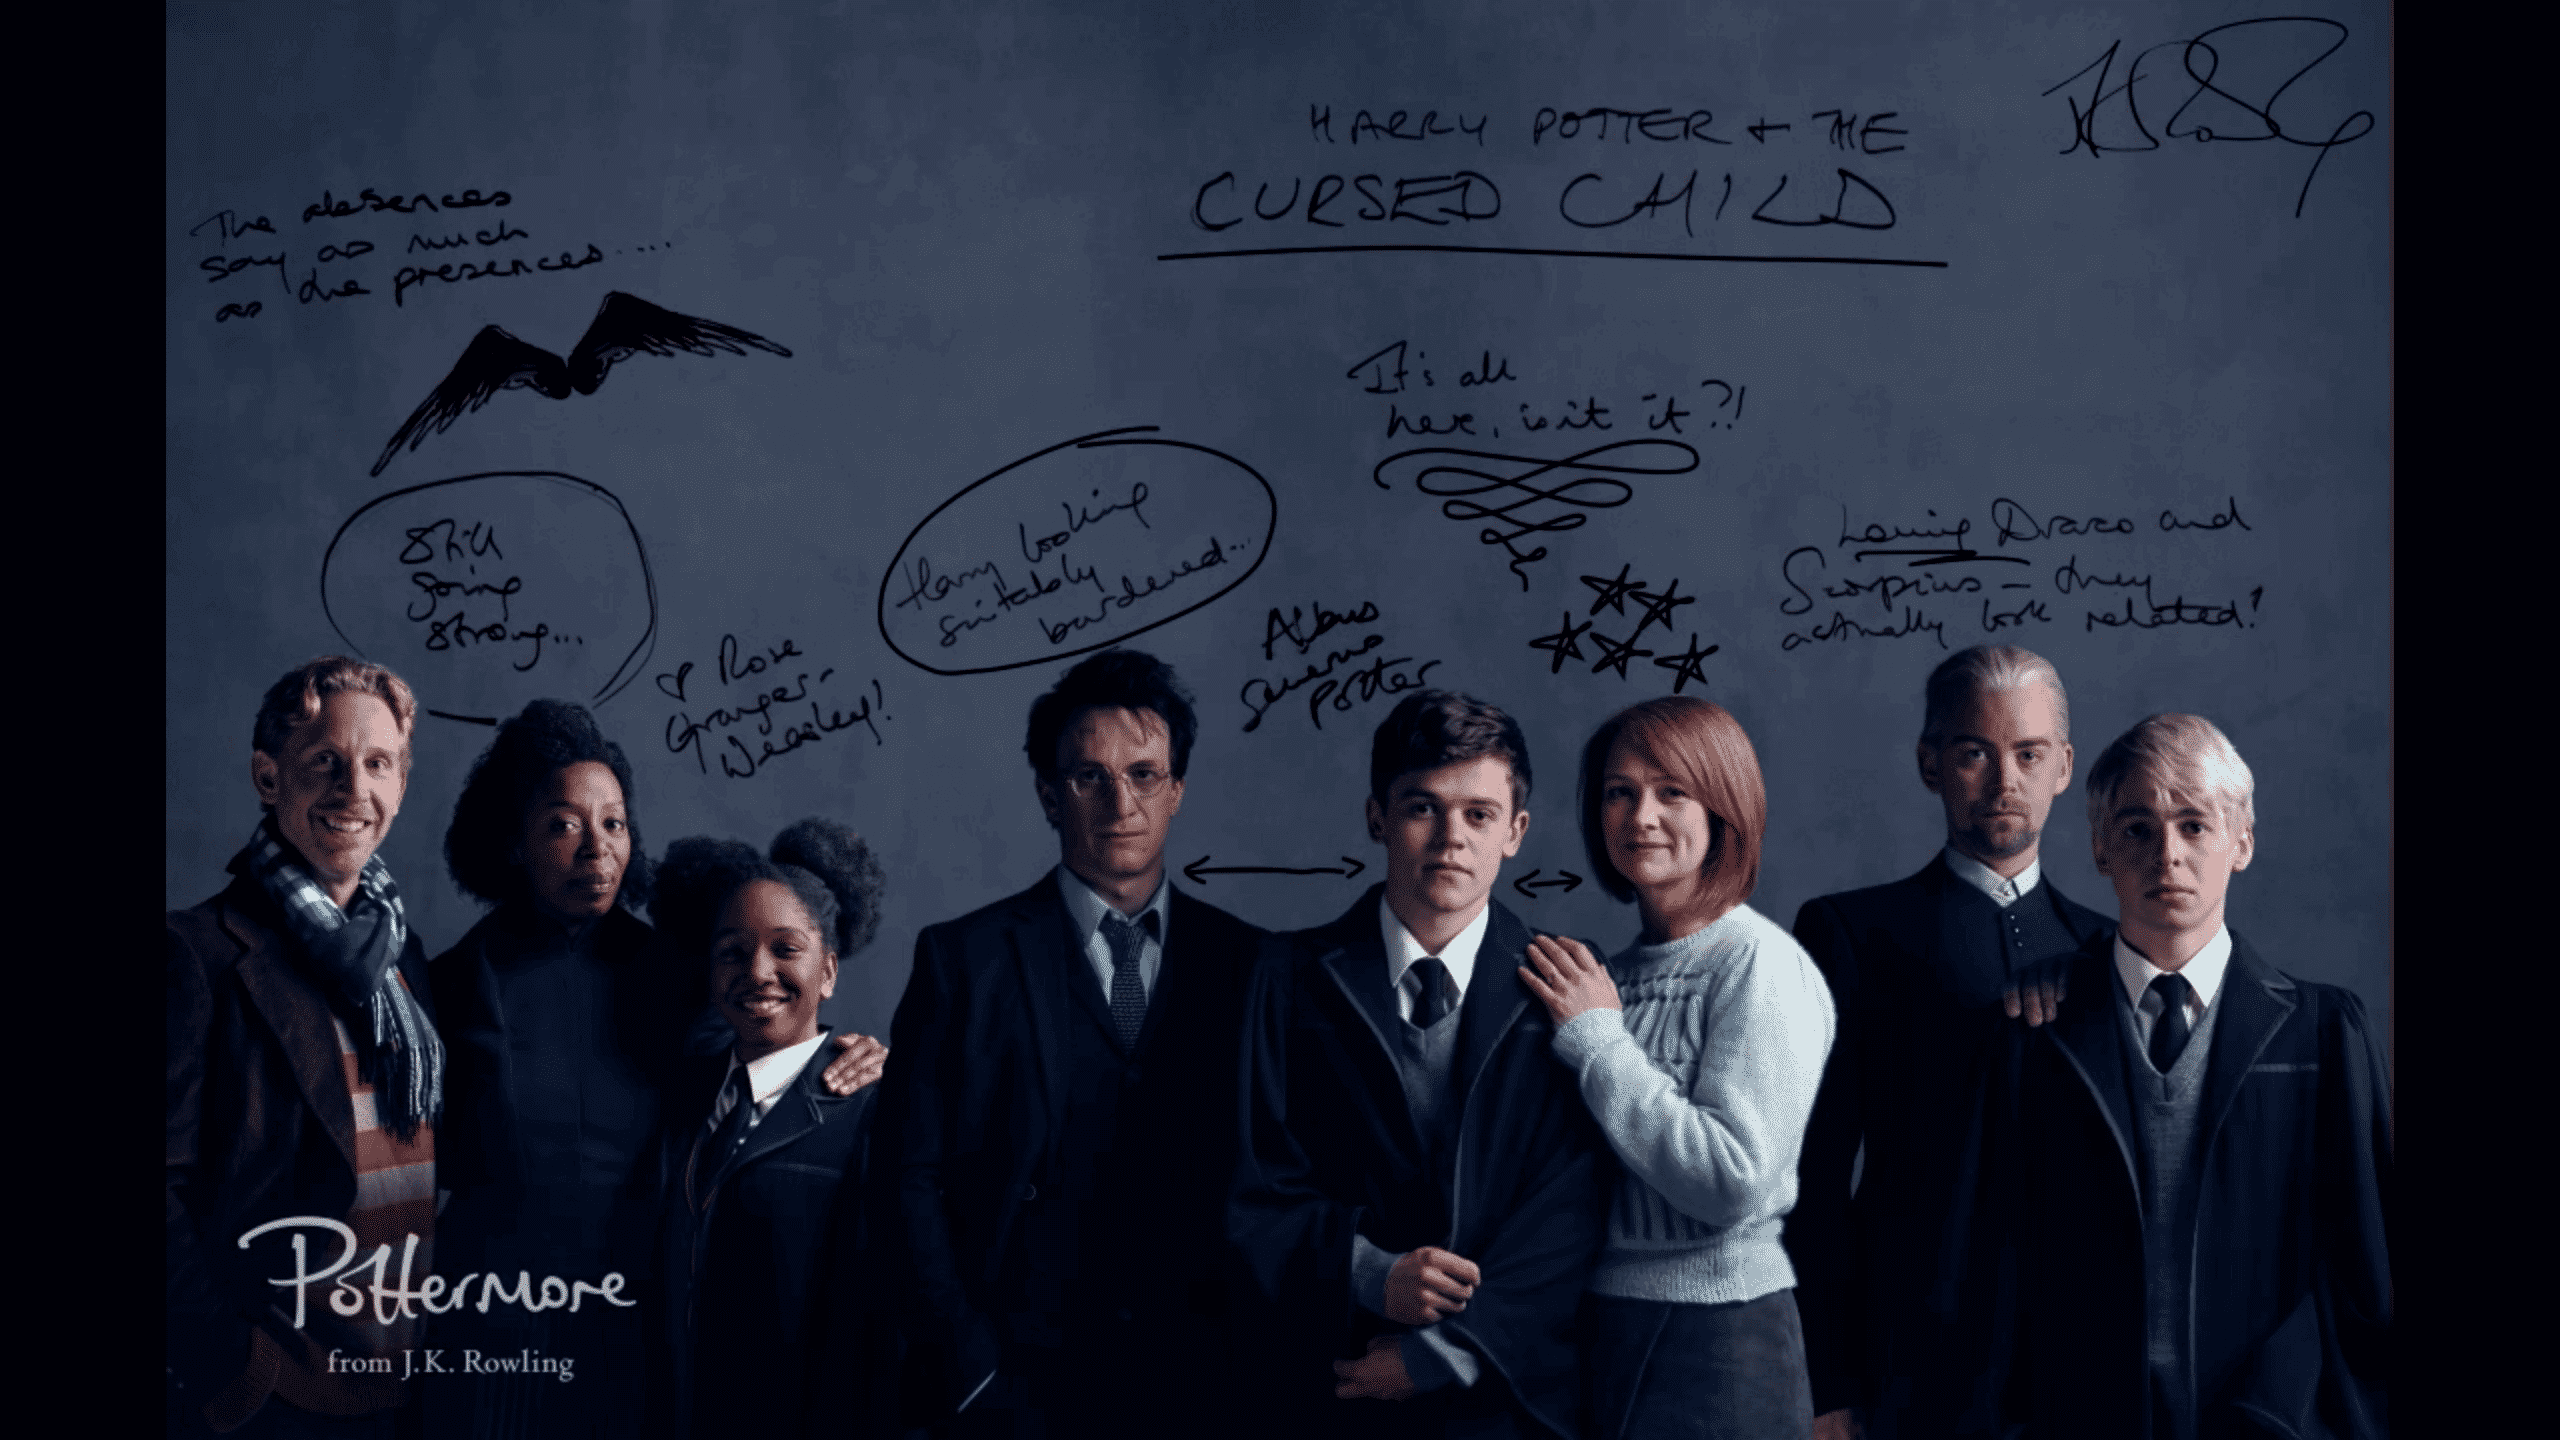 J.K. Rowling's notes on 'Harry Potter and the Cursed Child' plays cast revealed